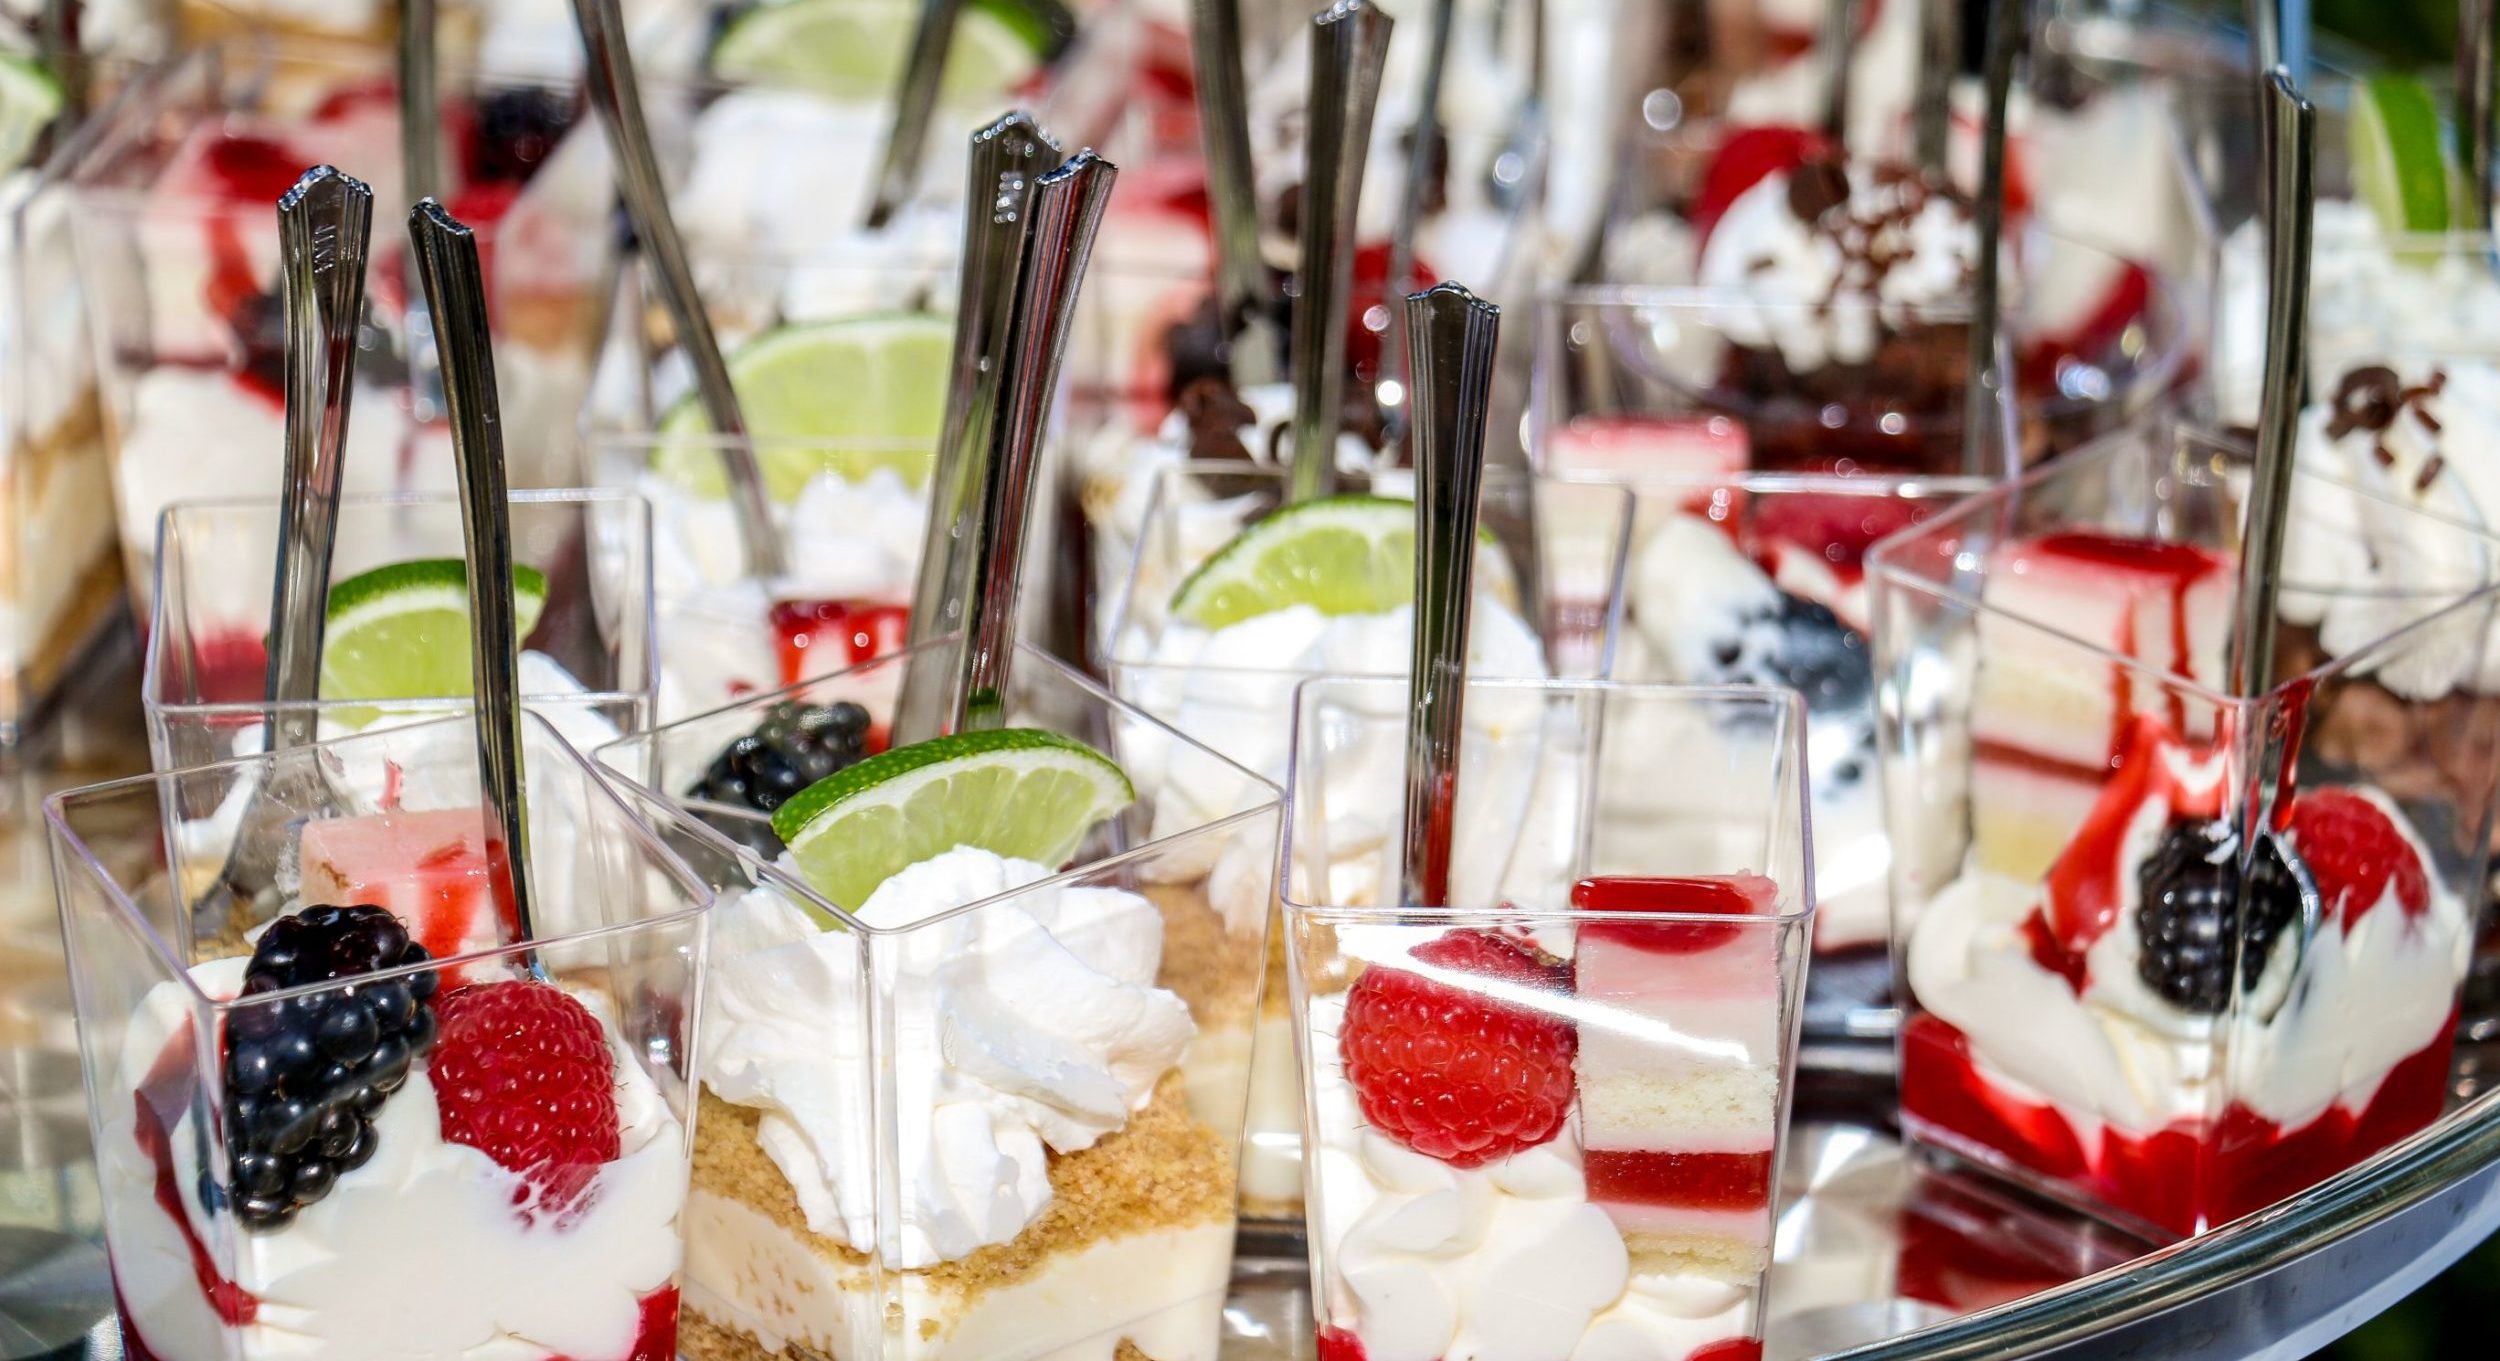 Parfaits plated in square glasses